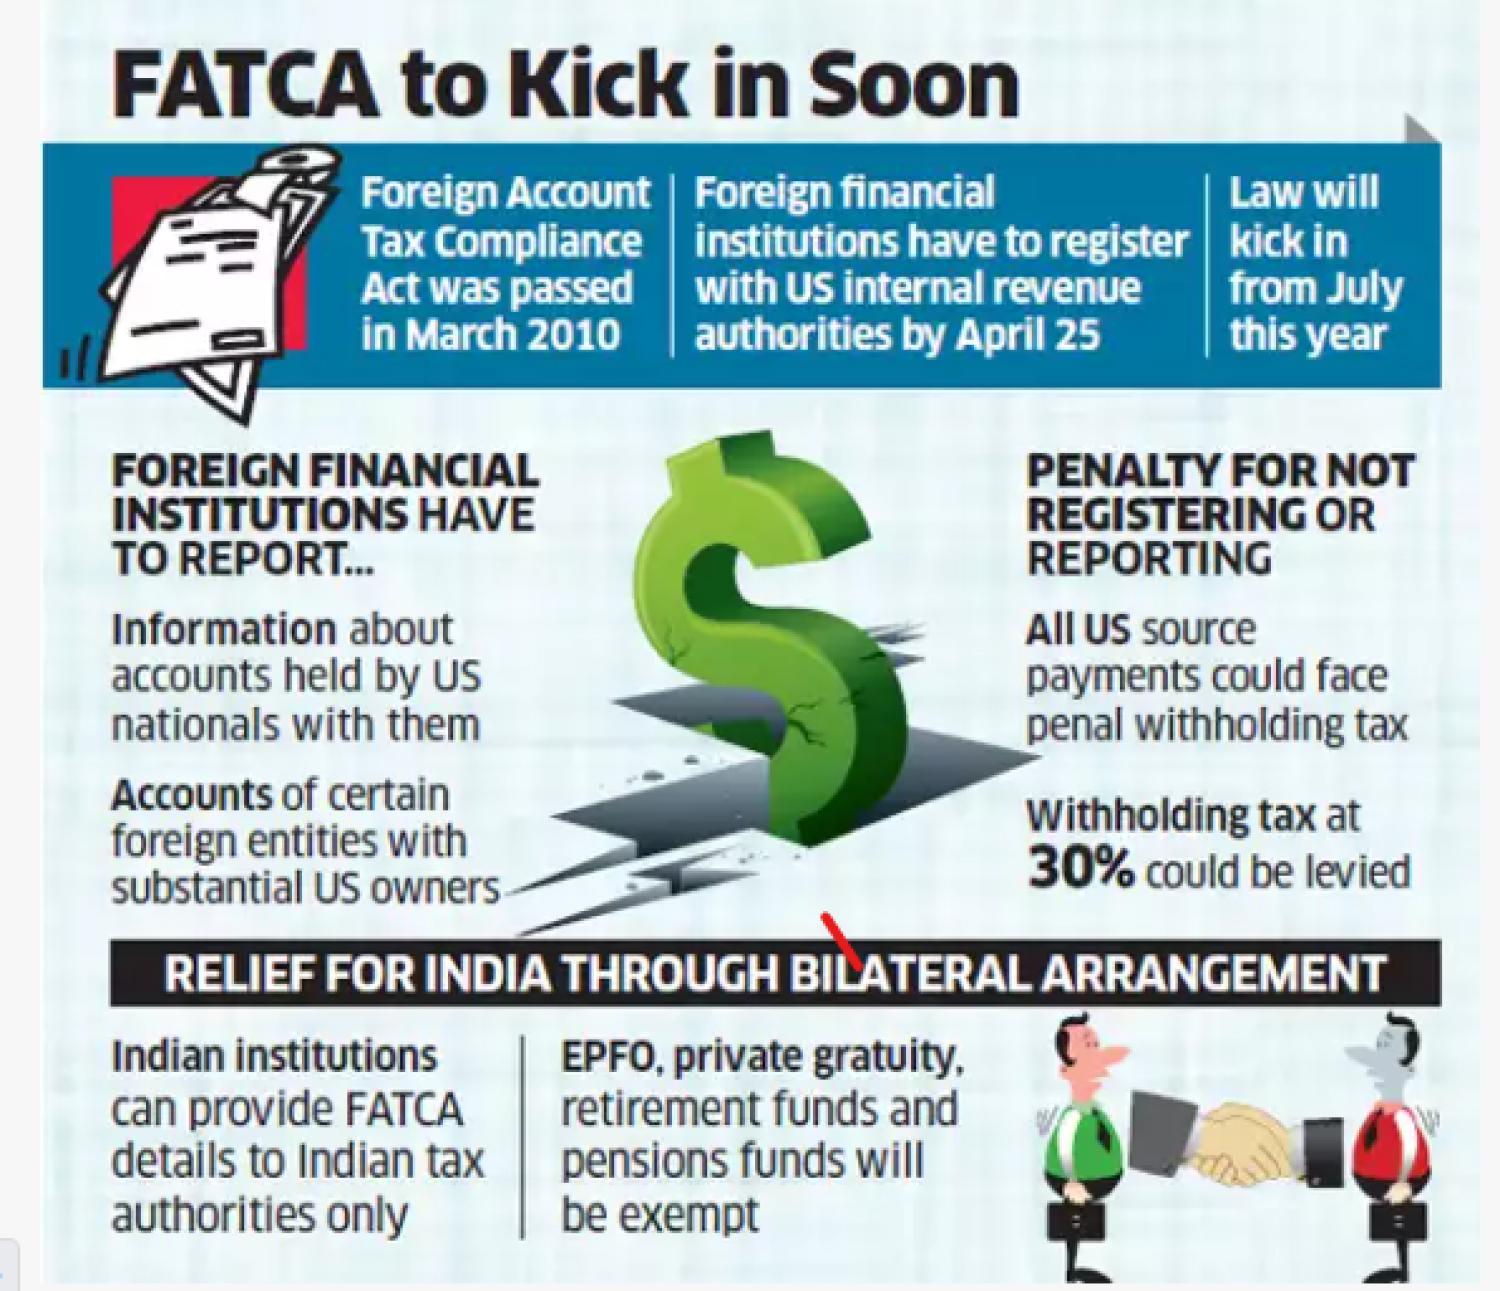 FATCA Reporting by reporting entities in India